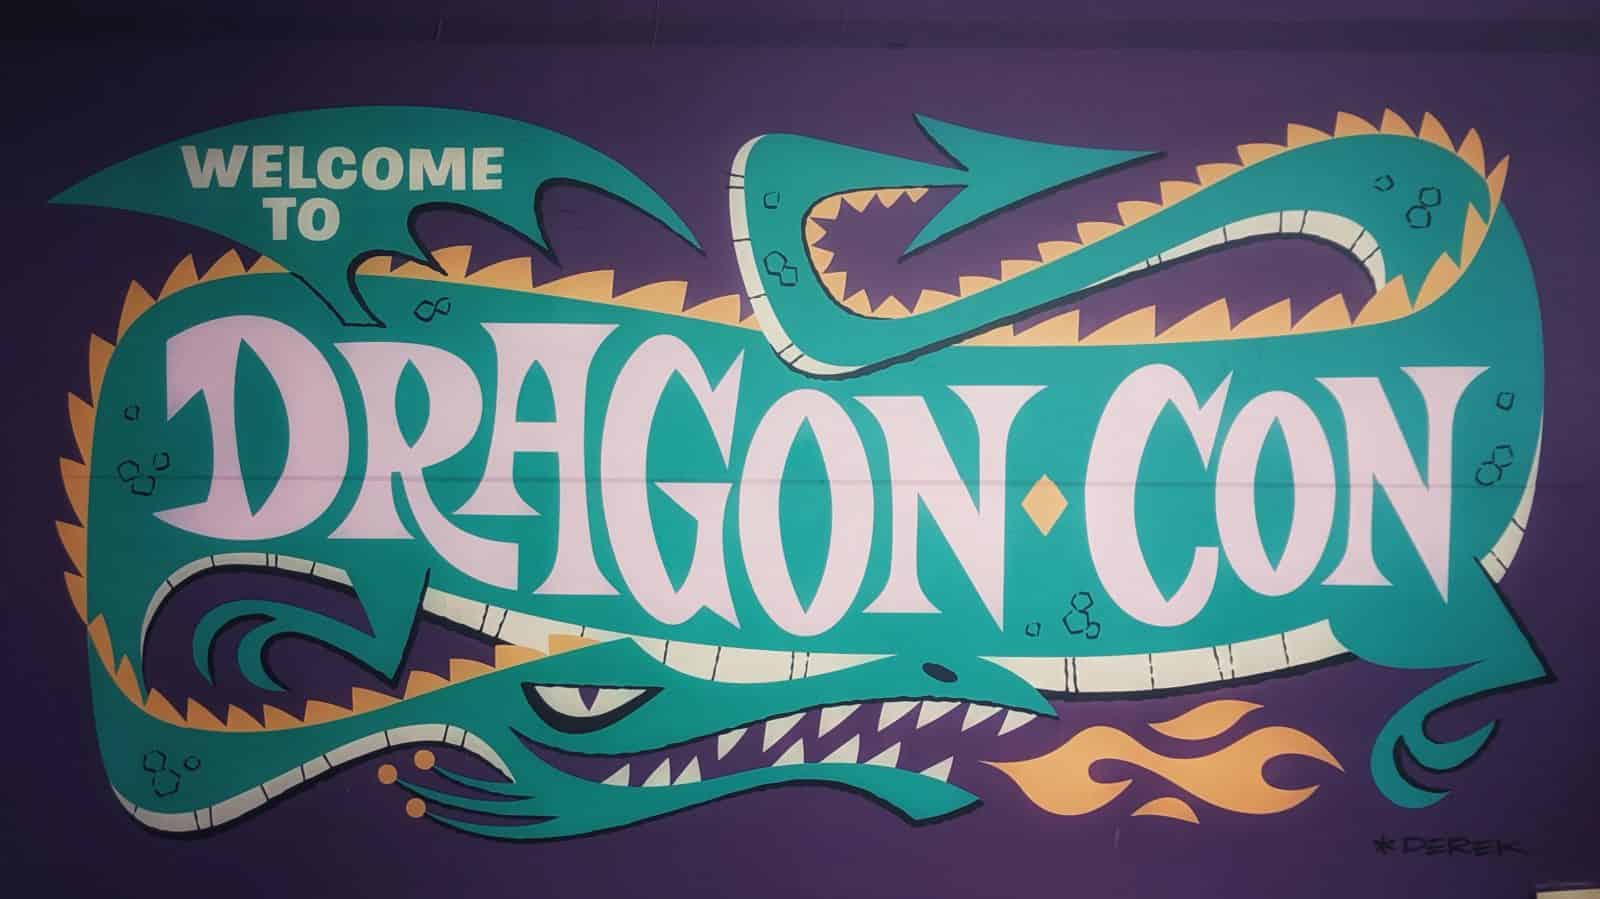 Welcome to Dragoncon 2019